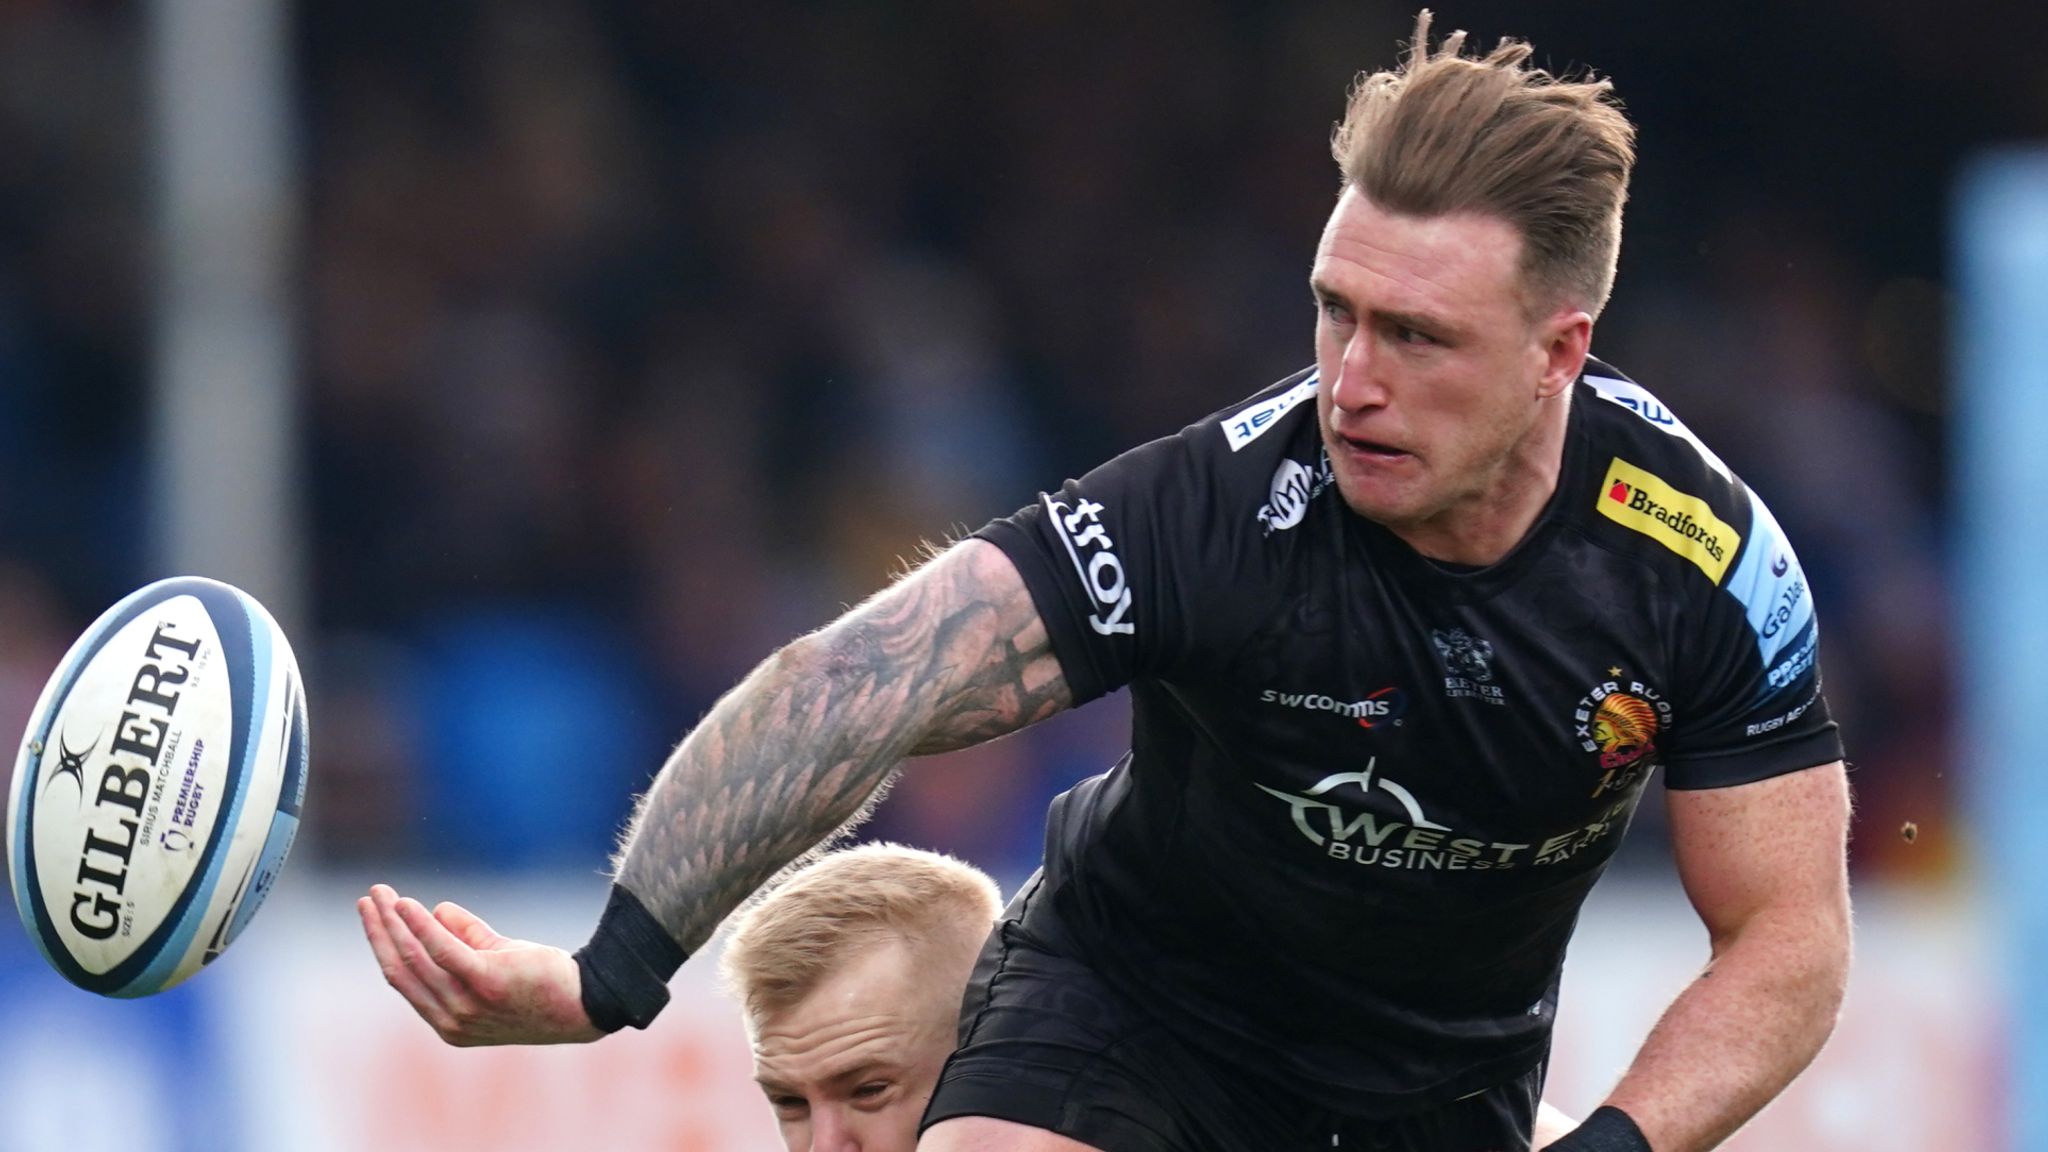 Gallagher Premiership Exeter Chiefs come back to beat Bath; Gloucester dealt play-offs blow with defeat to Wasps Rugby Union News Sky Sports